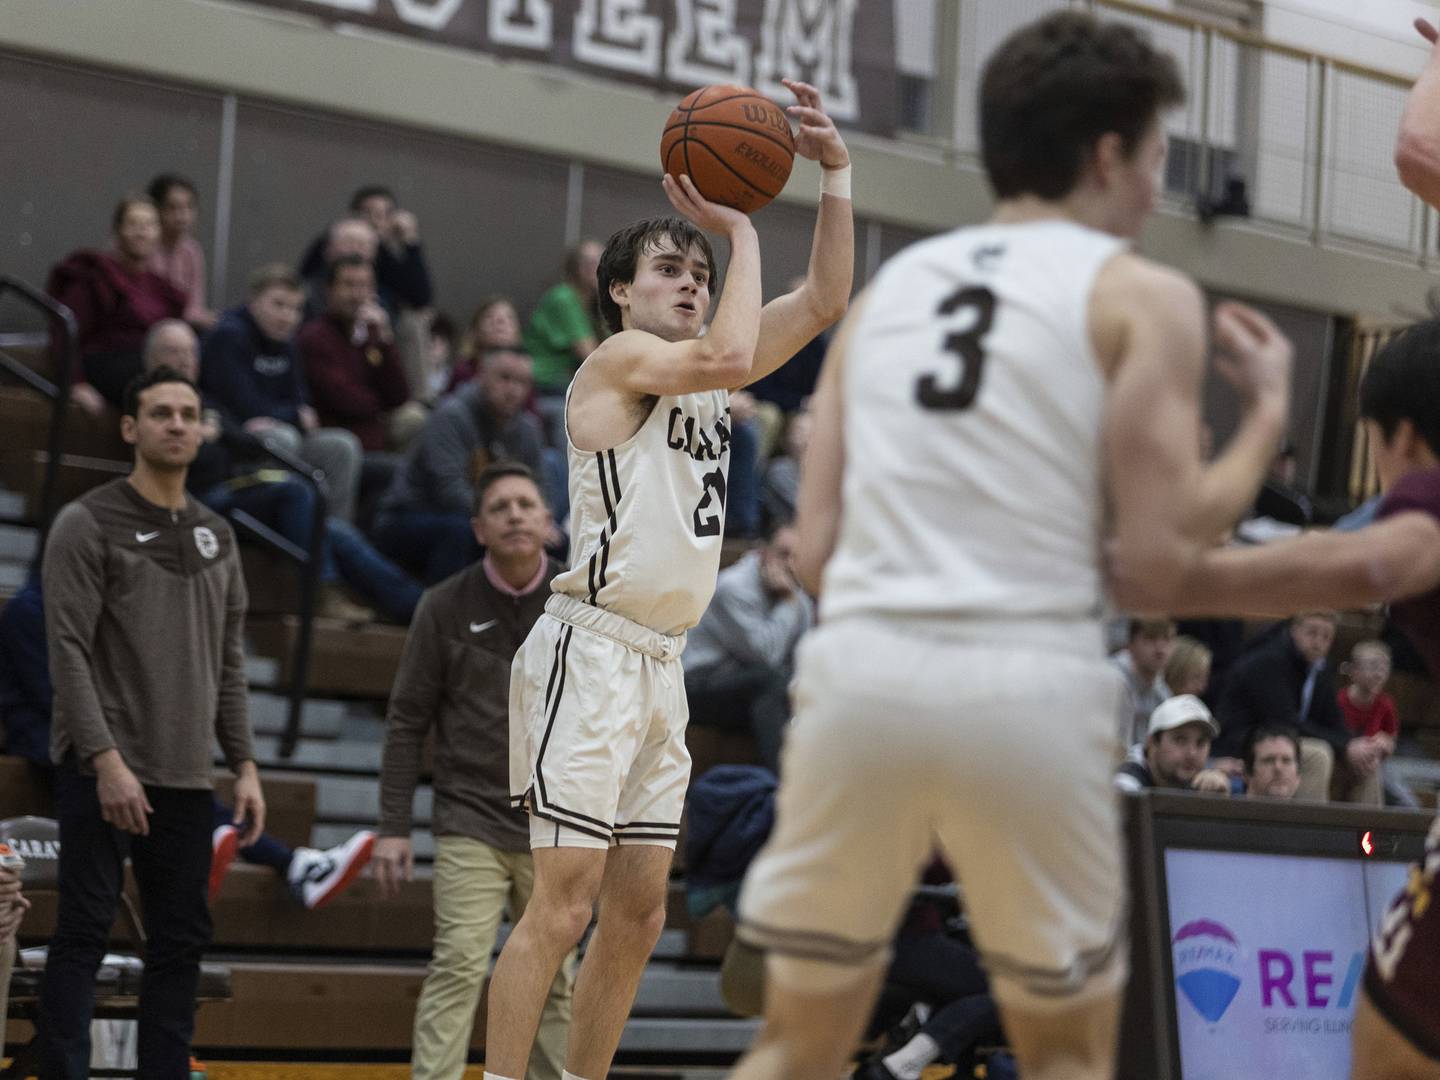 Mount Carmel's Anthony Ciaravino (21) drains a 3-pointer against Loyola during a Catholic League Blue game in Chicago on Tuesday, Dec. 20, 2022.